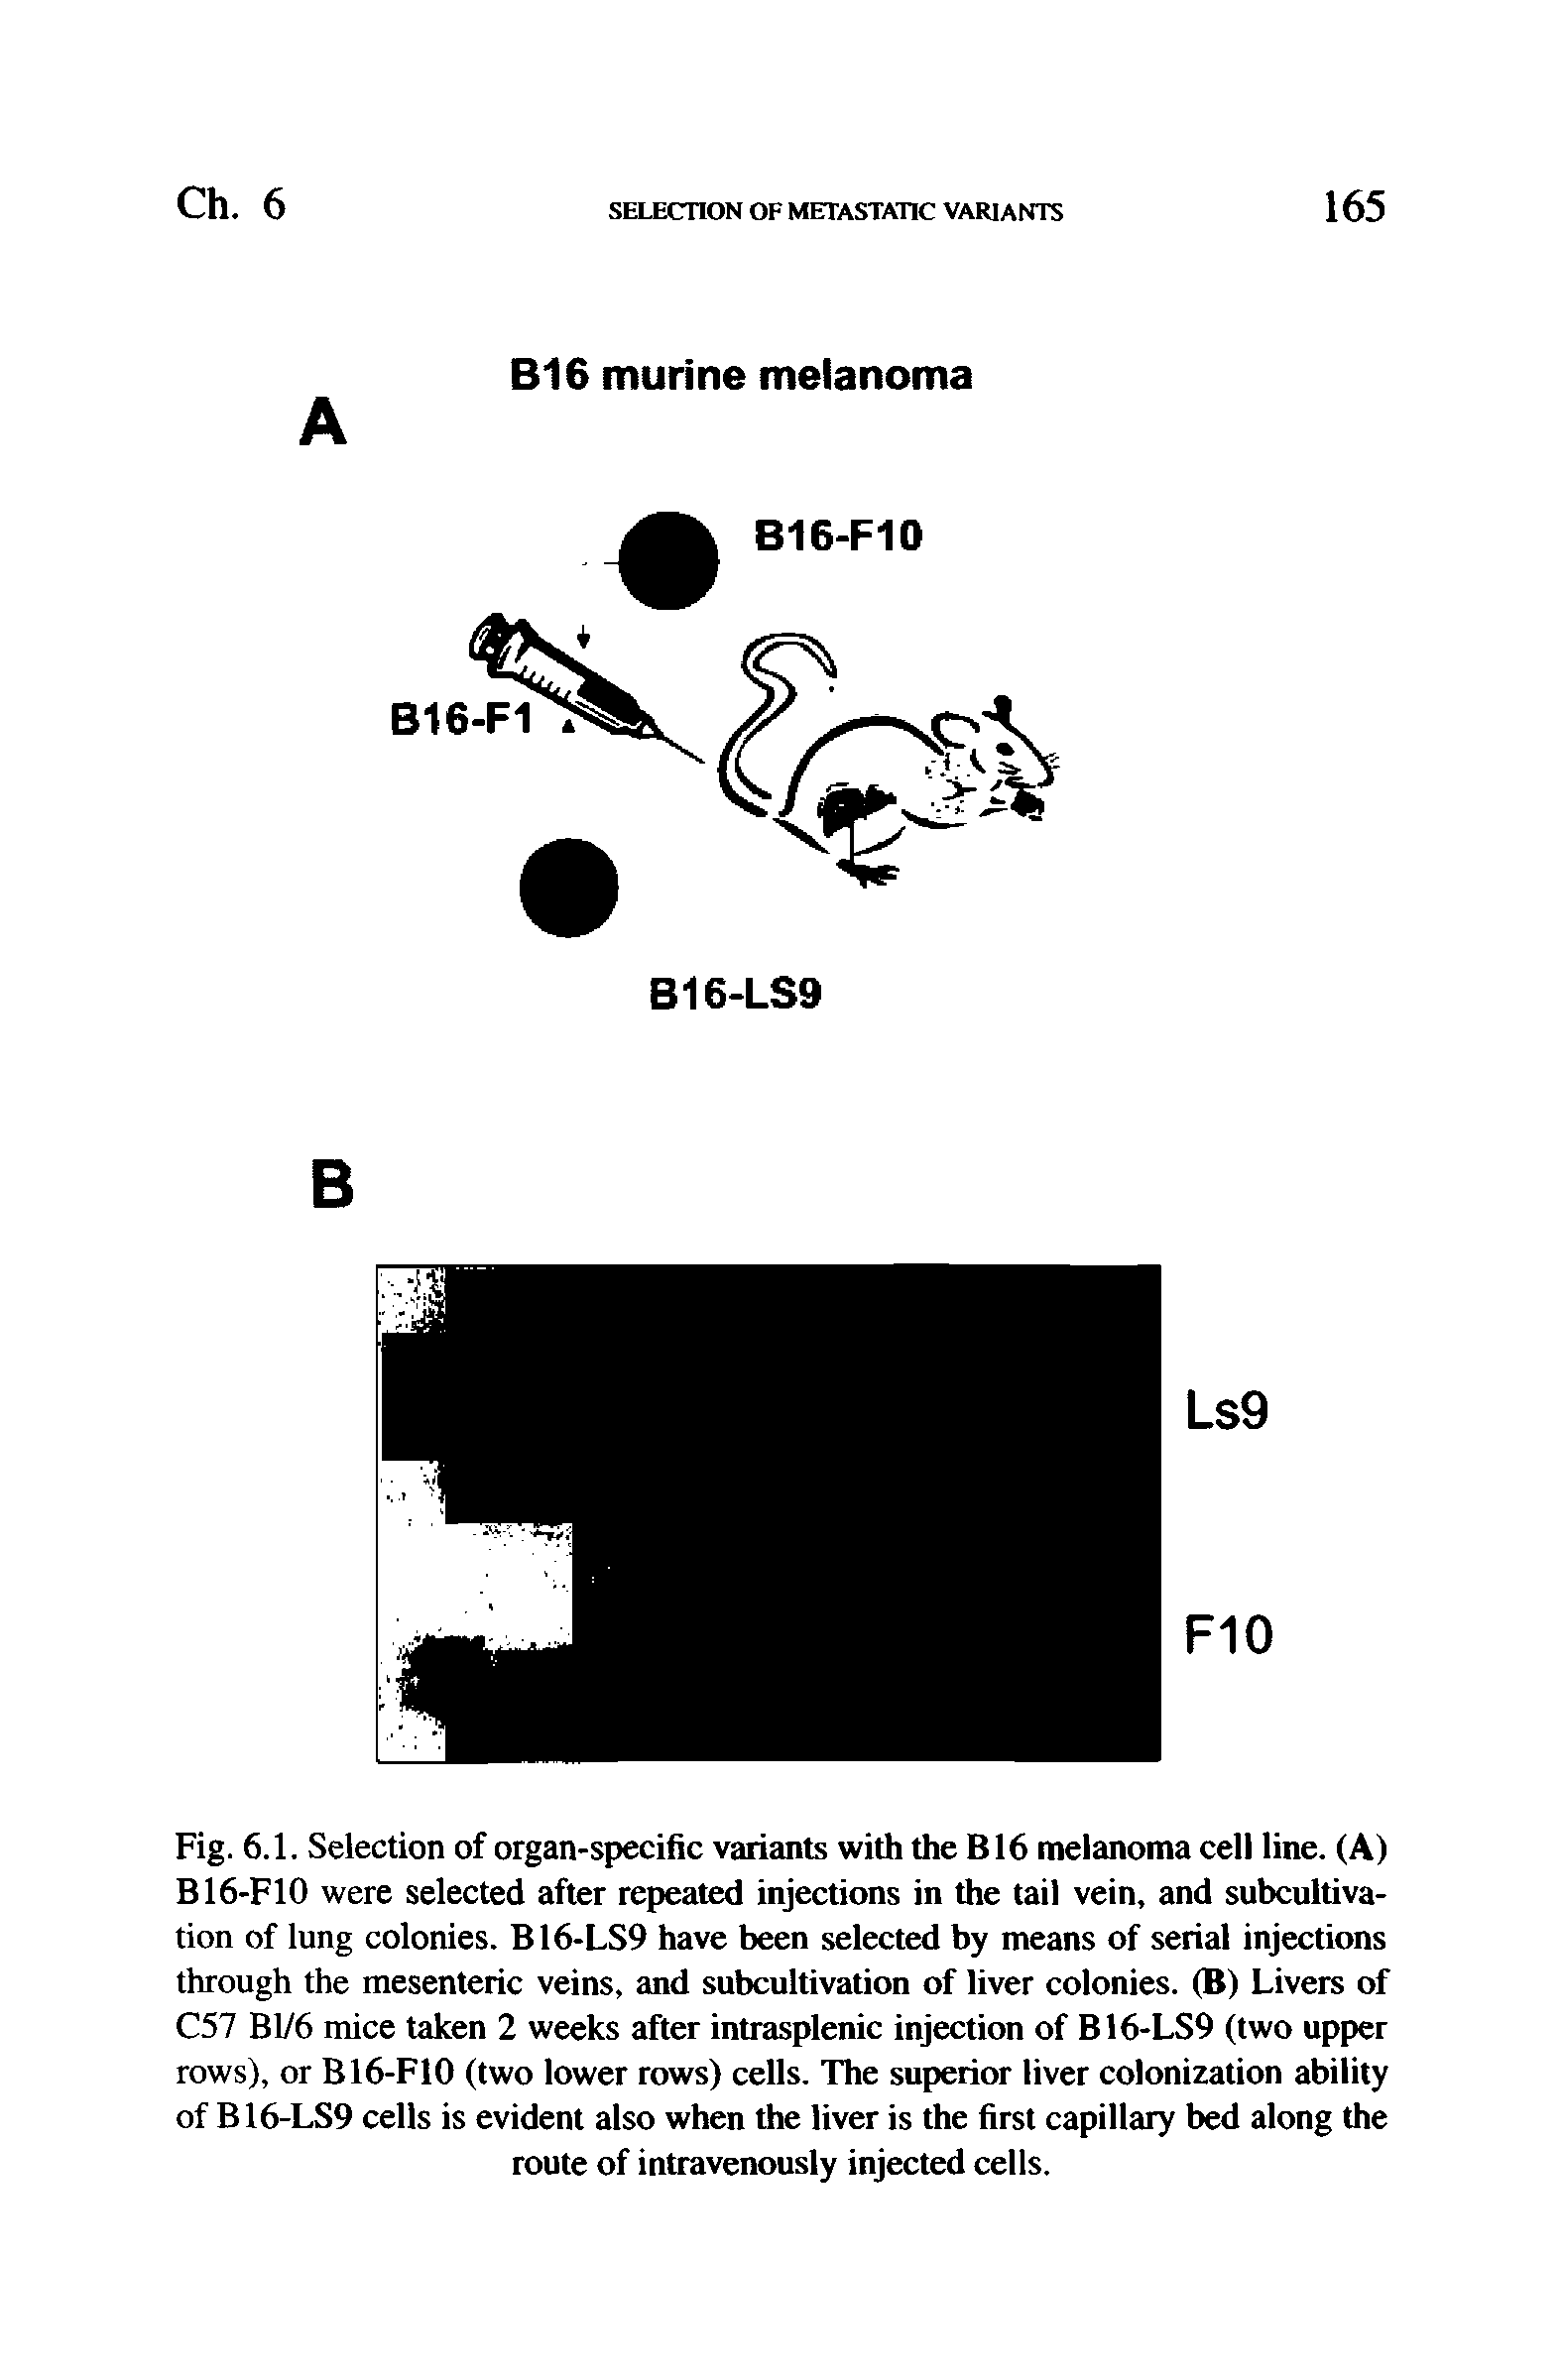 Fig. 6.1. Selection of organ-specific variants with the B16 melanoma cell line. (A) B16-F10 were selected after repeated injections in the tail vein, and subcultivation of lung colonies. B16-LS9 have been selected by means of serial injections through the mesenteric veins, and subcultivation of liver colonies. (B) Livers of C57 Bl/6 mice taken 2 weeks after intrasplenic injection of B16-LS9 (two upper rows), or B16-F10 (two lower rows) cells. The superior liver colonization ability of B16-LS9 cells is evident also when the liver is the first capillary bed along the route of intravenously injected cells.